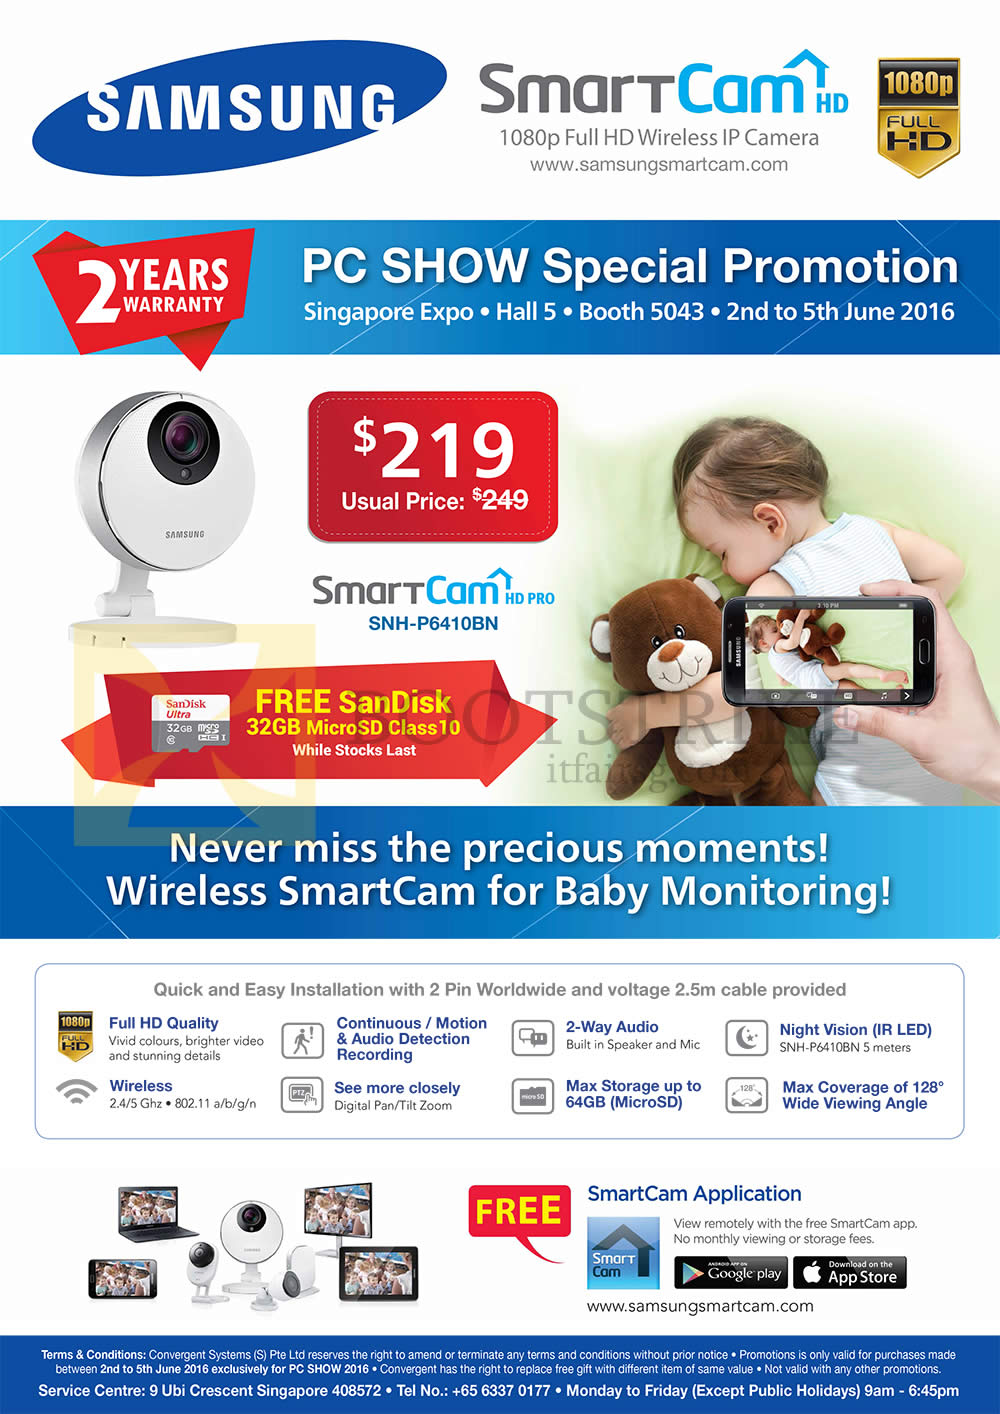 PC SHOW 2016 price list image brochure of Samsung SGVideoPro IP Cameras Smartcam HD Pro SNH-P6410BN